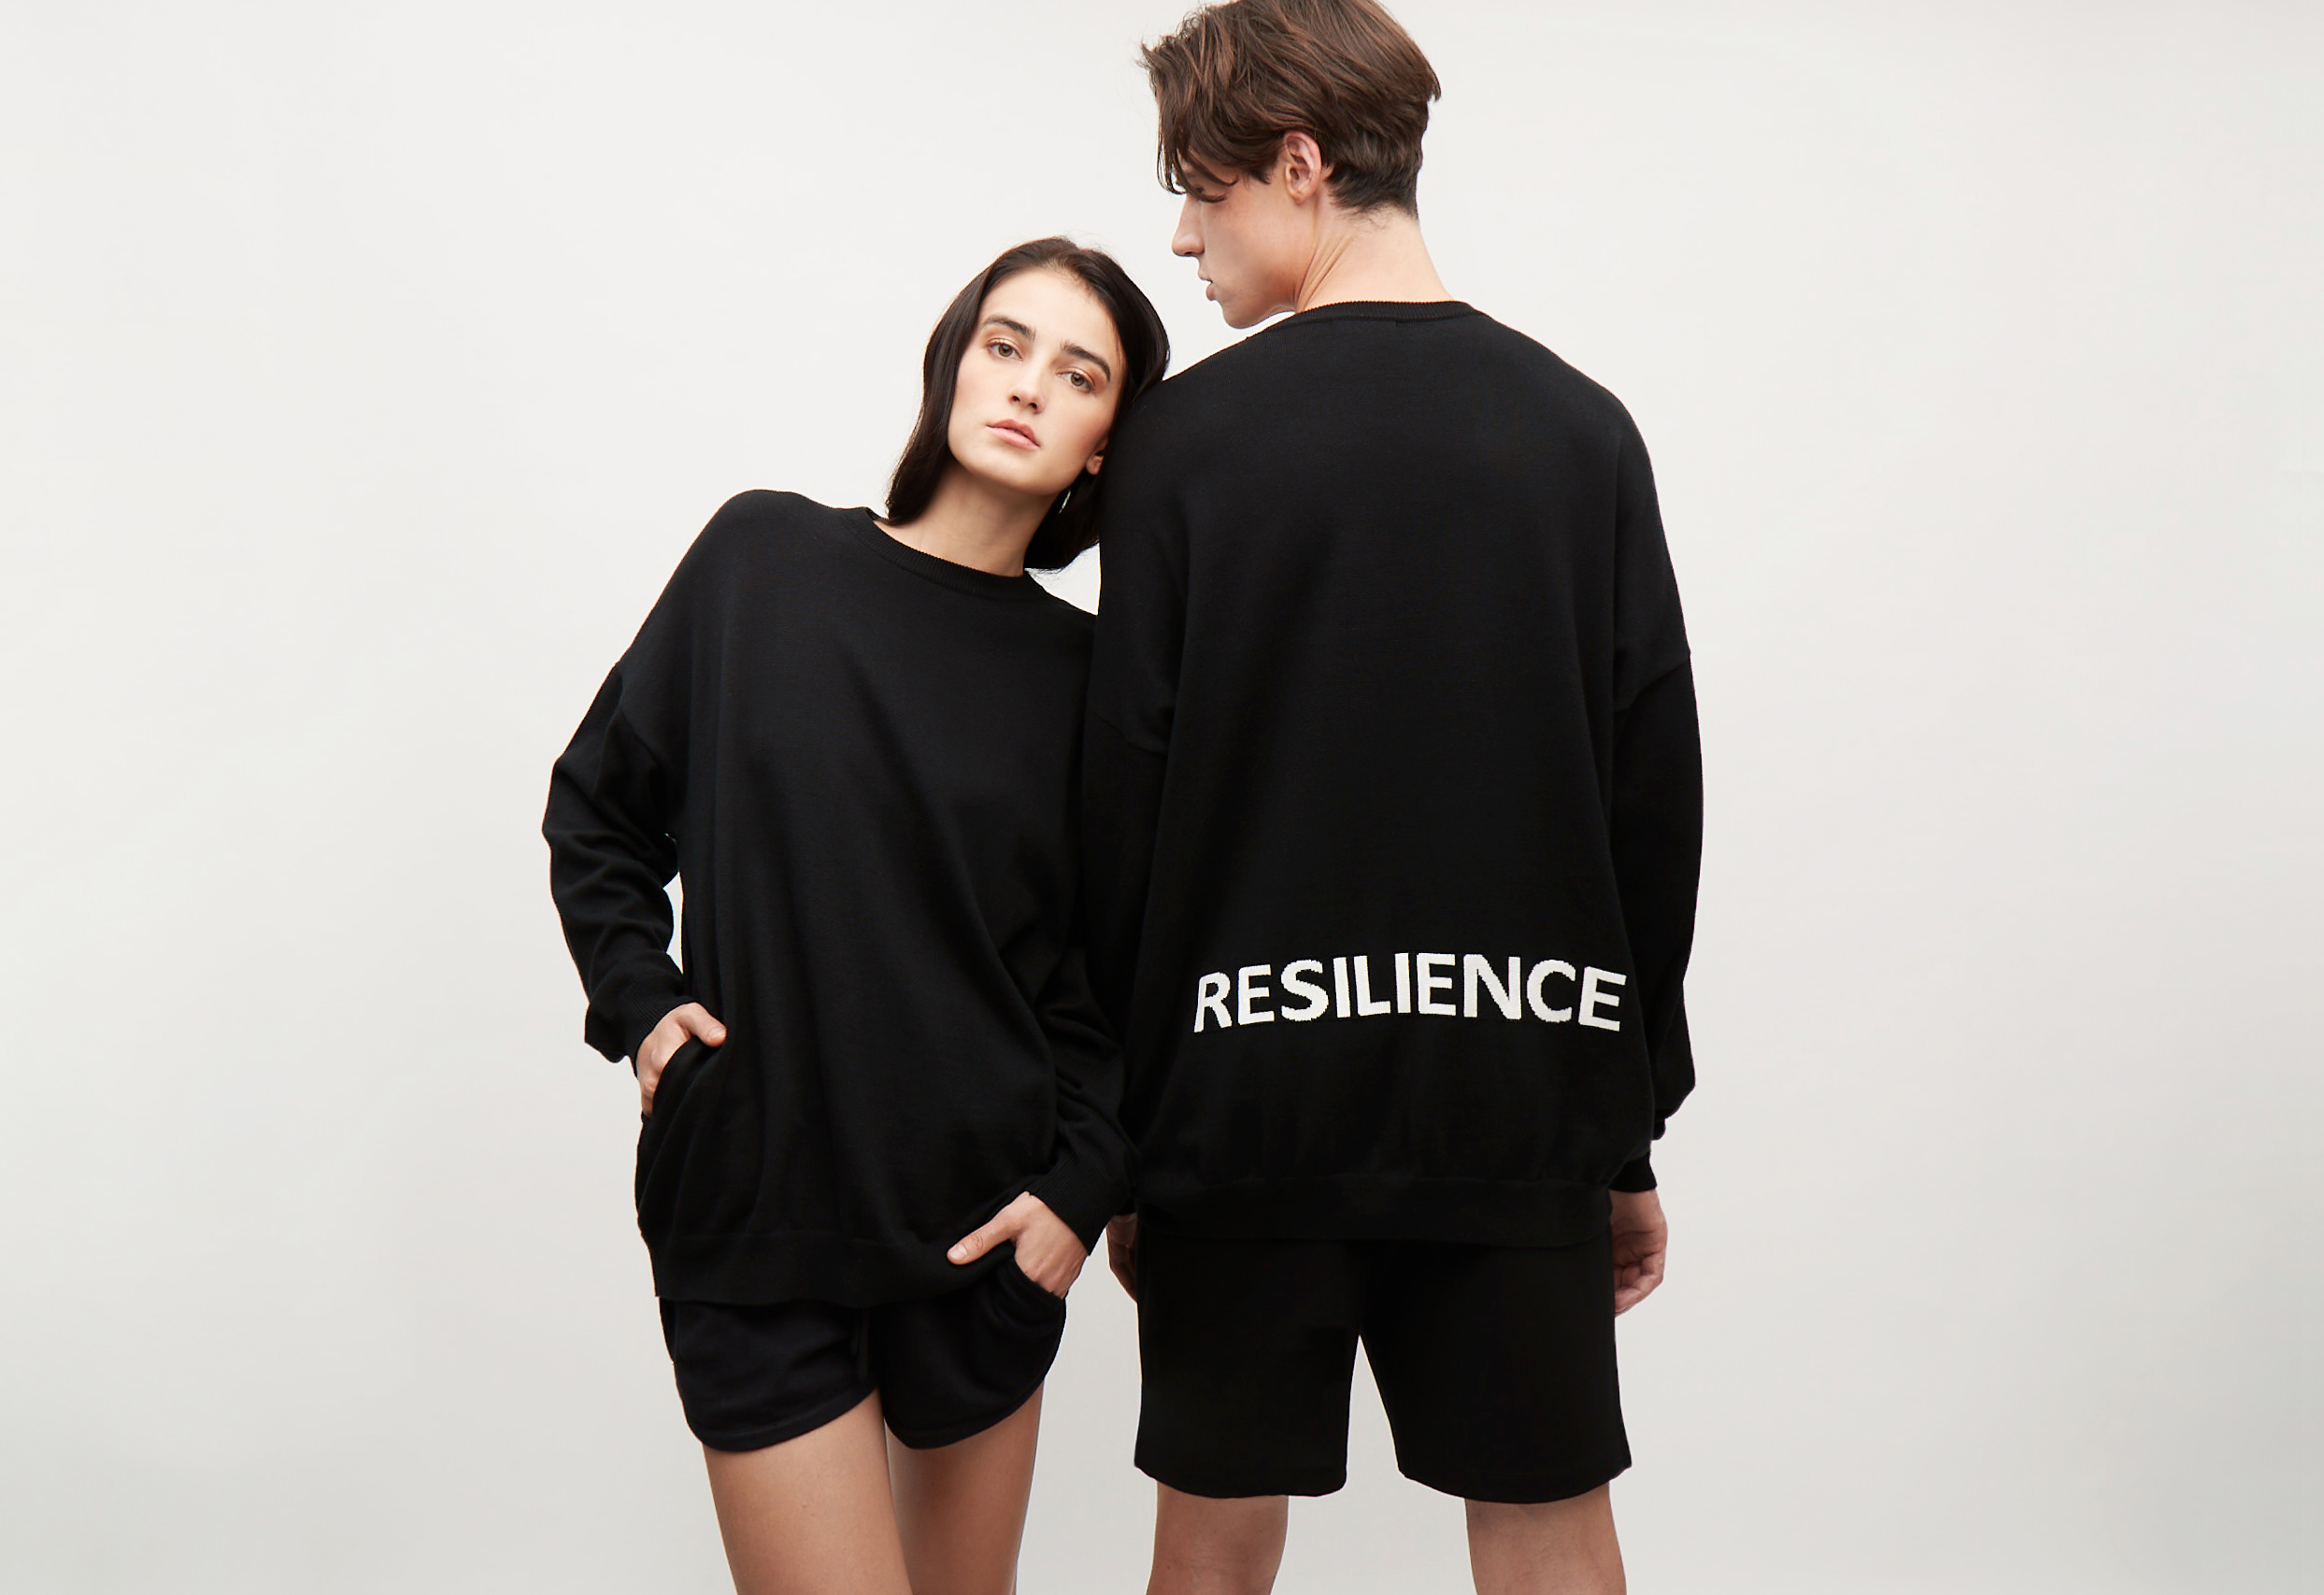 Resilience in the form of fashion